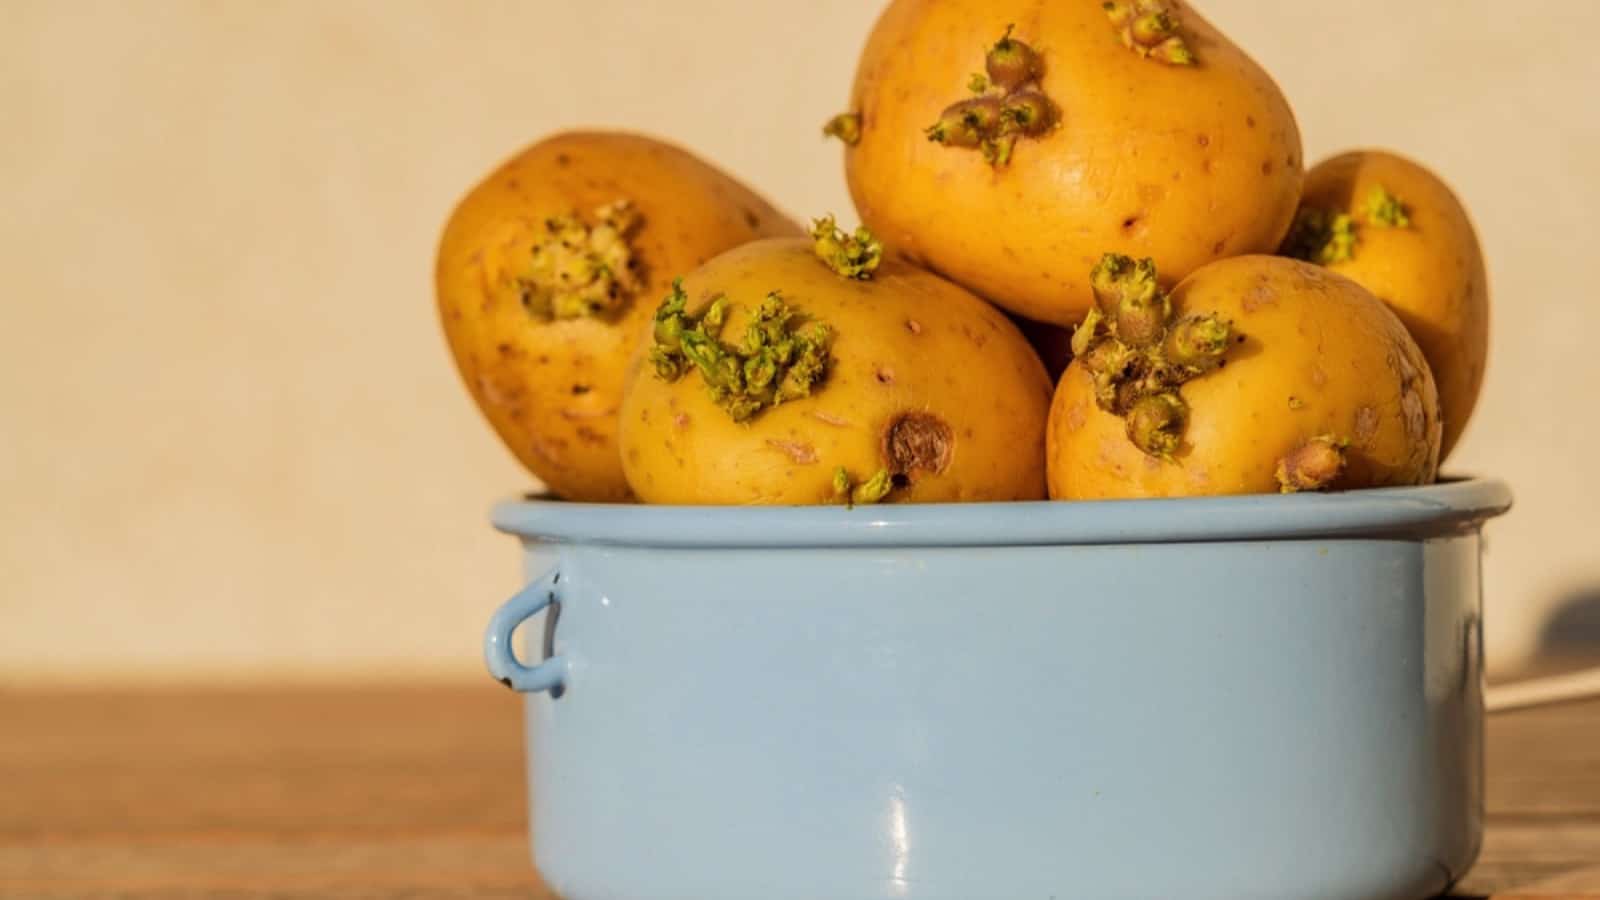 Yellow potatoes in a blue bowl on a wooden table.